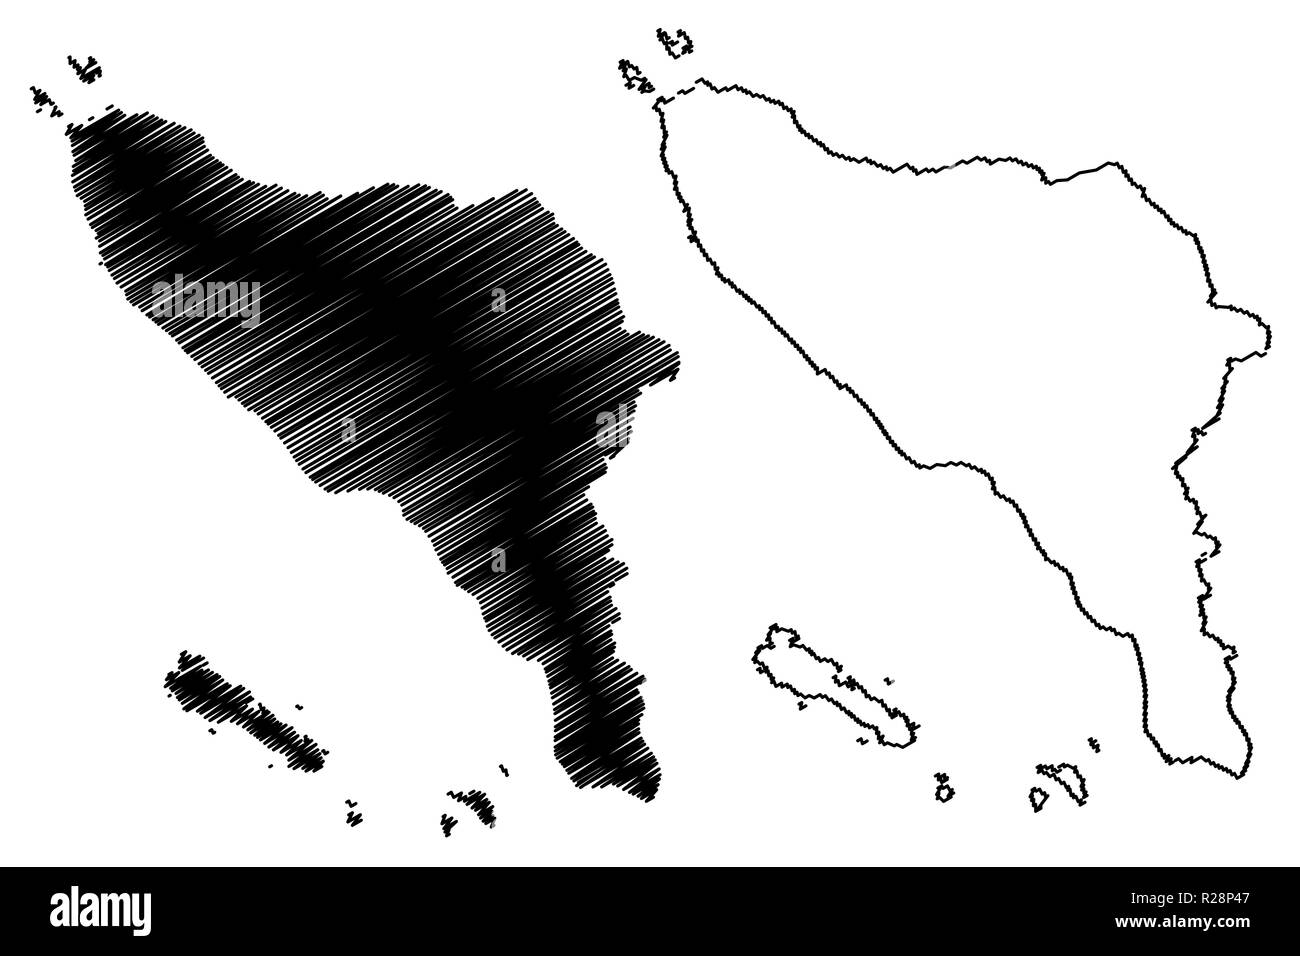 Aceh (Subdivisions of Indonesia, Provinces of Indonesia) map vector illustration, scribble sketch Aceh map Stock Vector